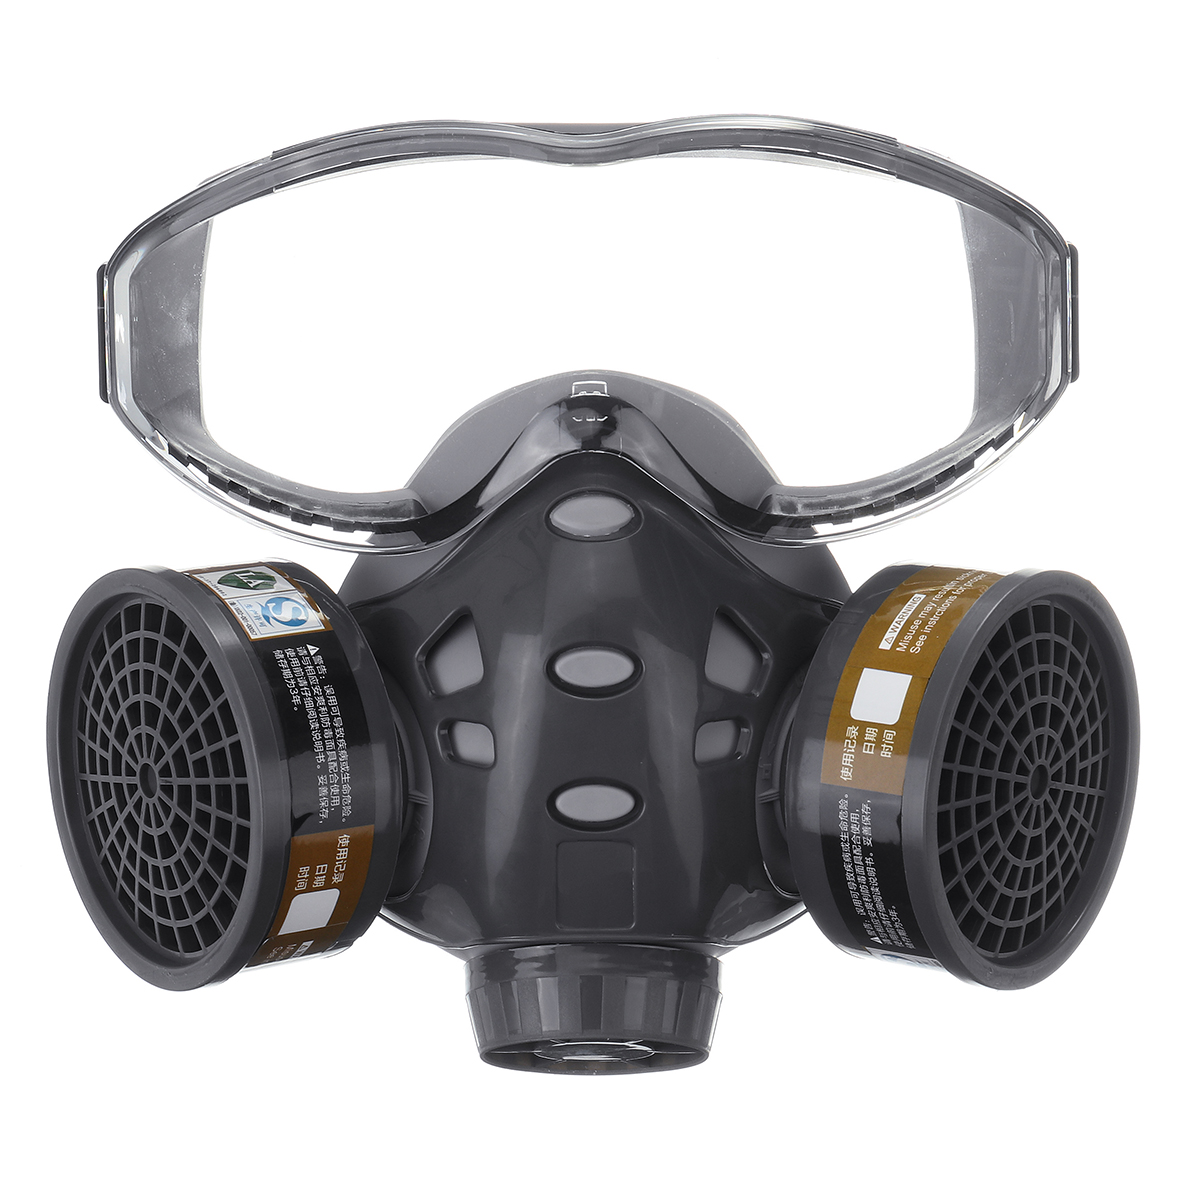 Find Filter Accessories For 6800 Gas Mask Full Face Facepiece Respirator Painting Spraying for Sale on Gipsybee.com with cryptocurrencies